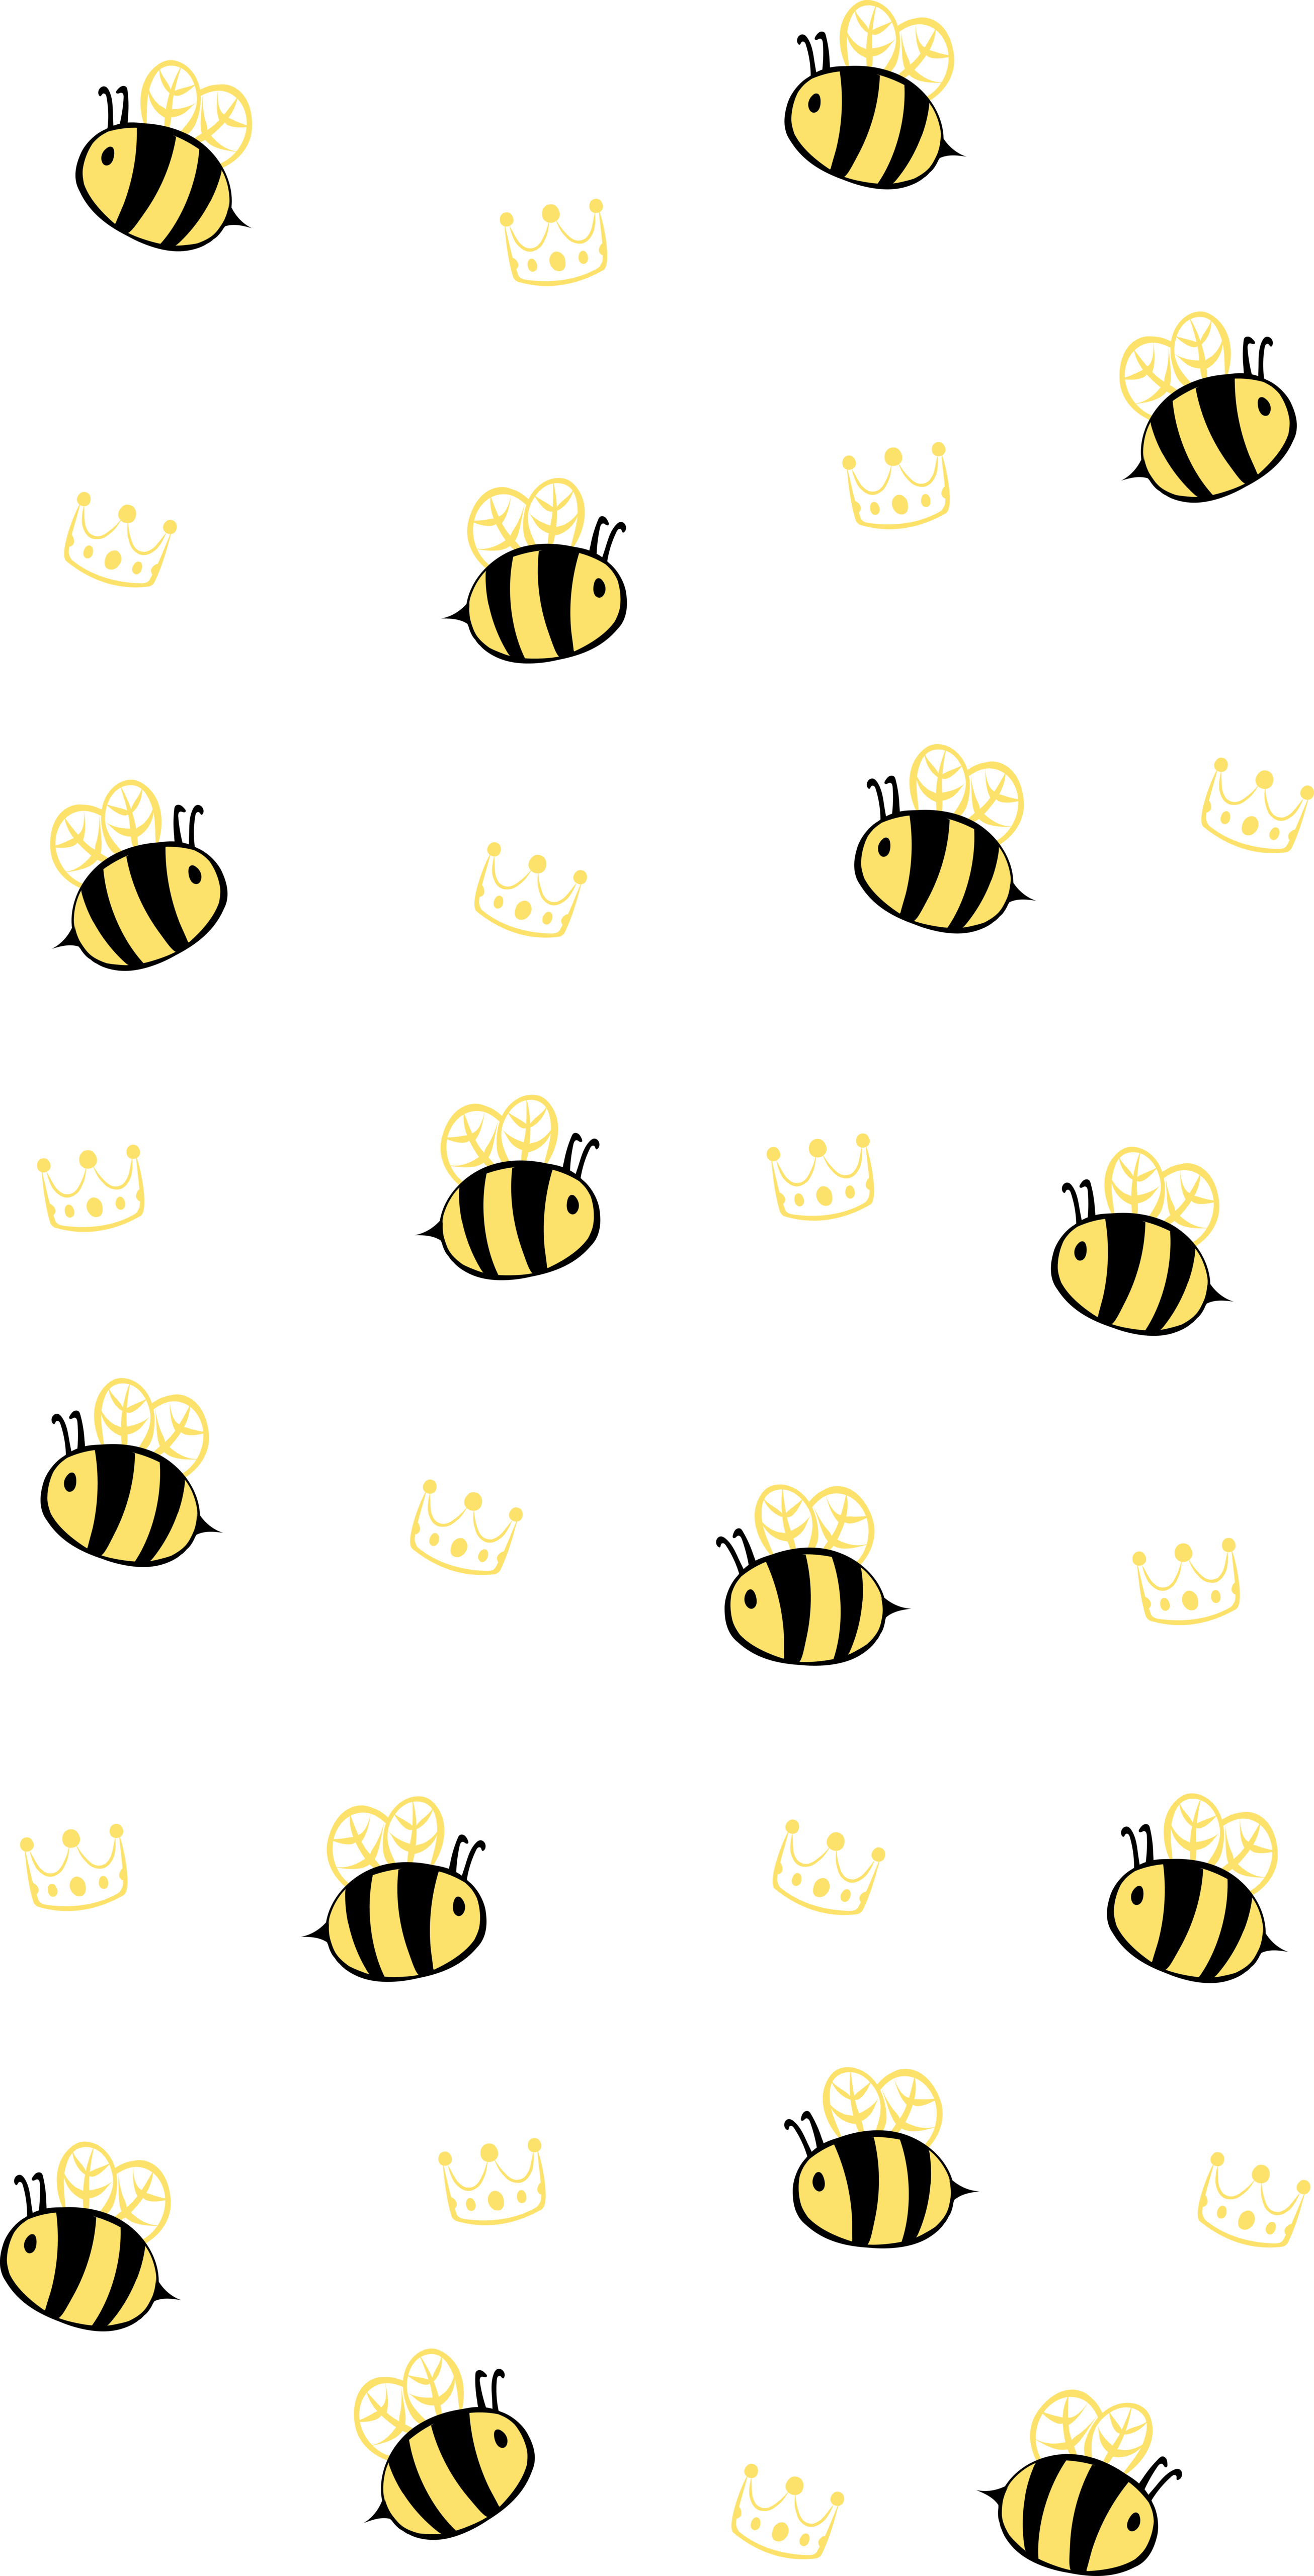 Download wallpaper 1350x2400 bumble bee flower macro iphone 876s6  for parallax hd background